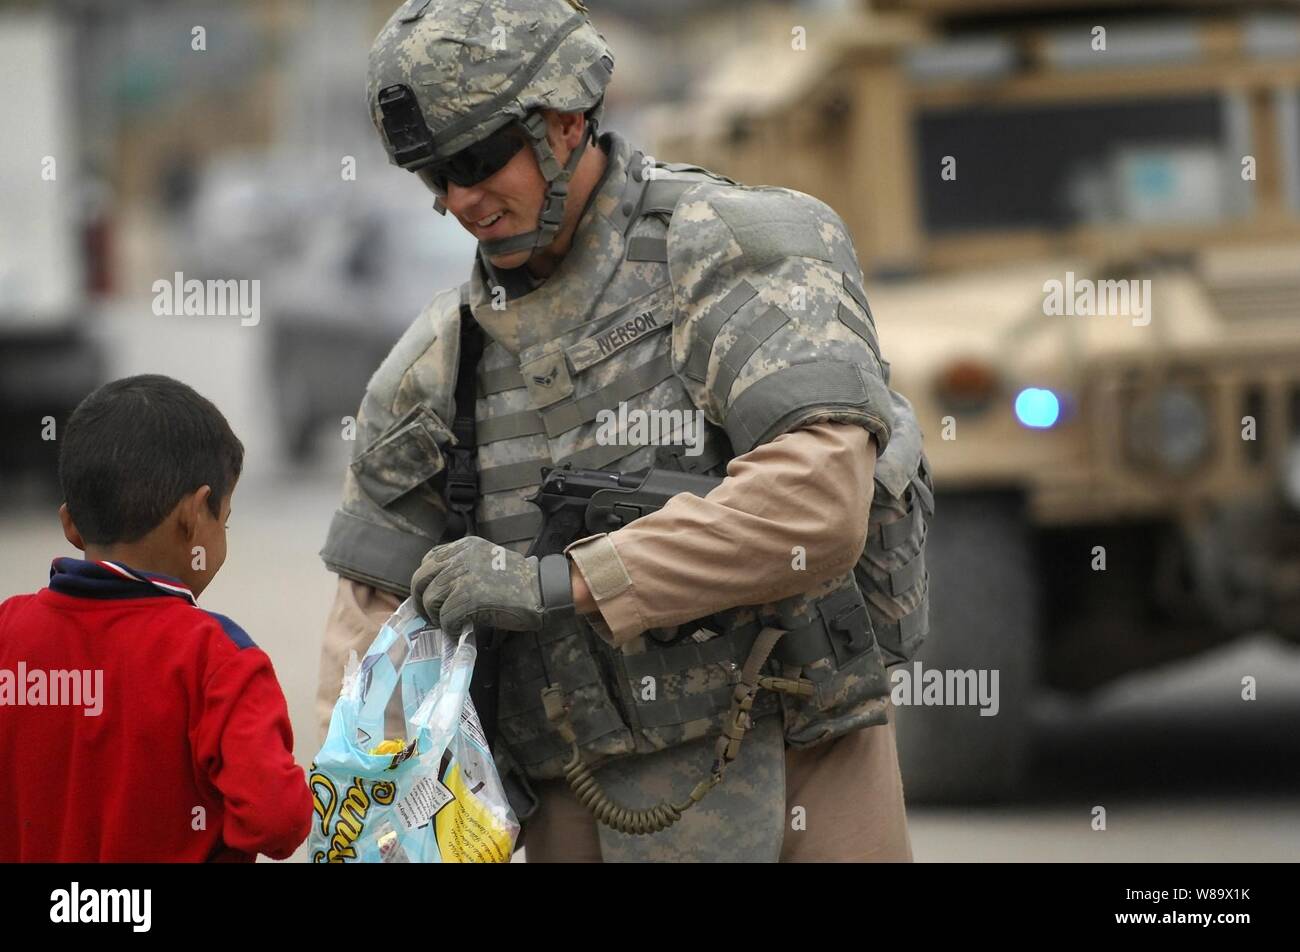 U.S. Air Force Airman 1st Class Justin Iverson, assigned to Detachment 3, 732nd Expeditionary Security Forces Squadron, attached to the 1st Brigade Combat Team, 4th Infantry Division, hands out candy to Iraqi children during a patrol in the Doura district of Baghdad, Iraq, on Nov. 22, 2008. Stock Photo